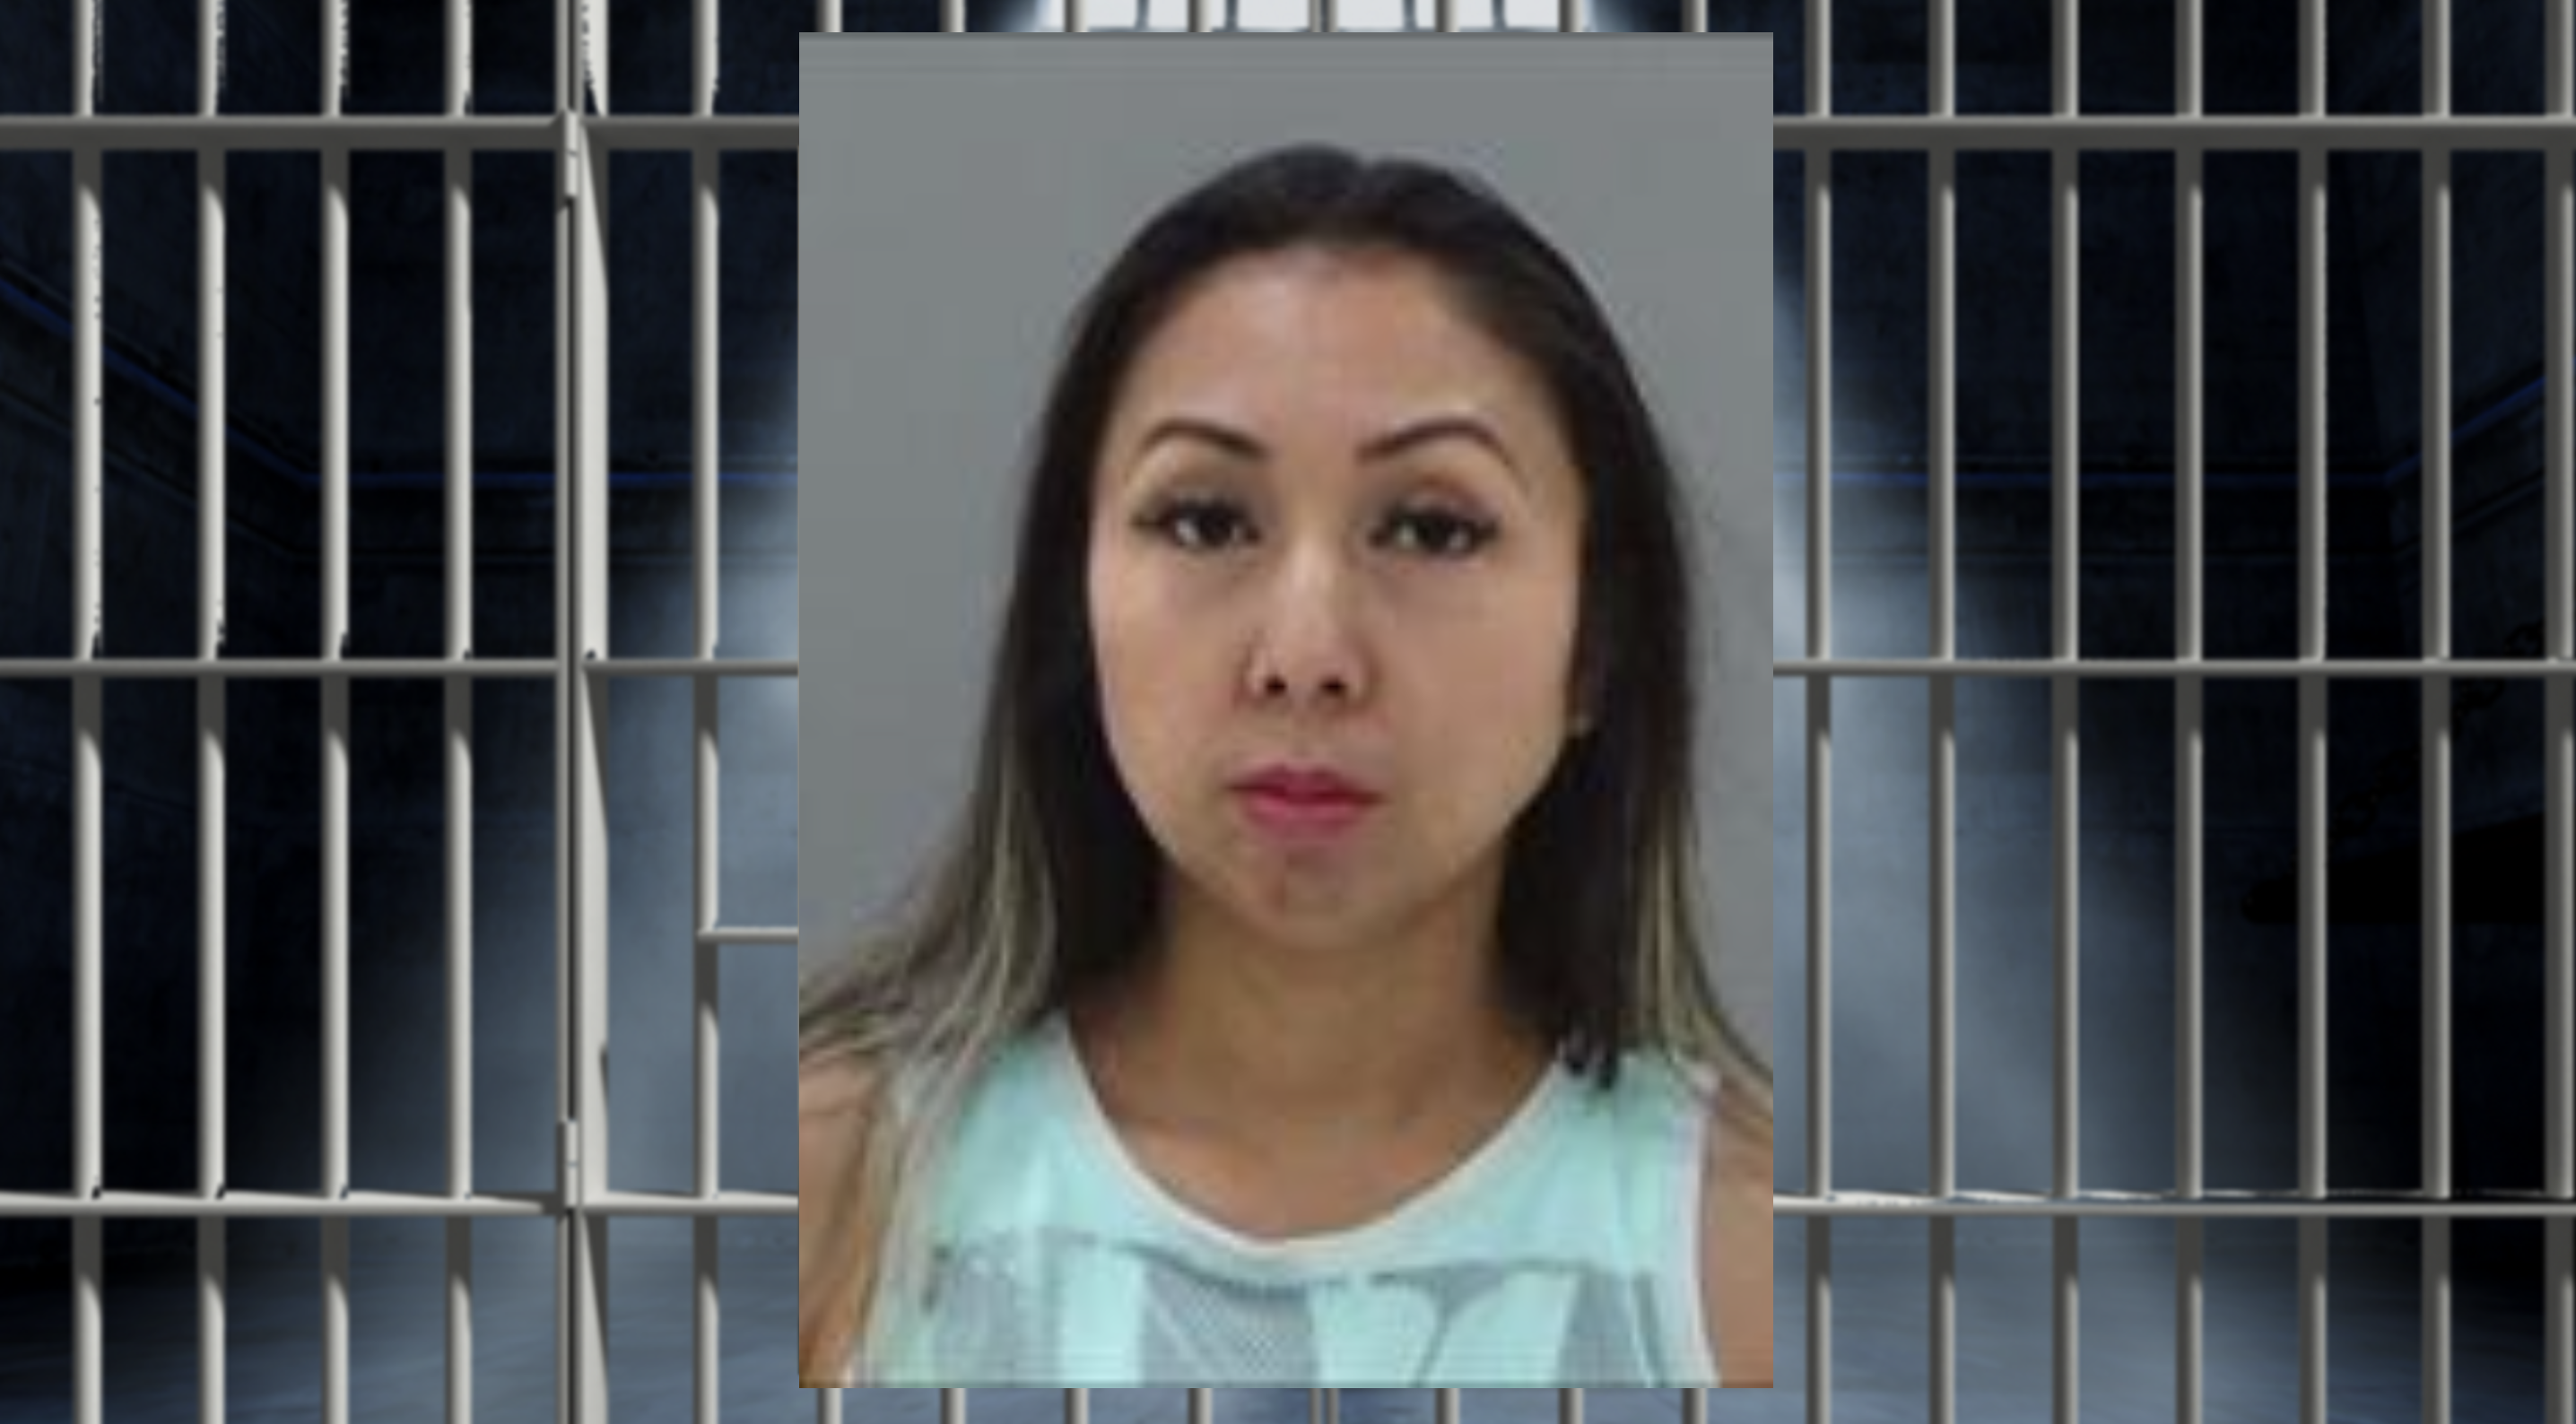 San Angelo Woman Arrested for Alleged Tryst with Juvenile photo image